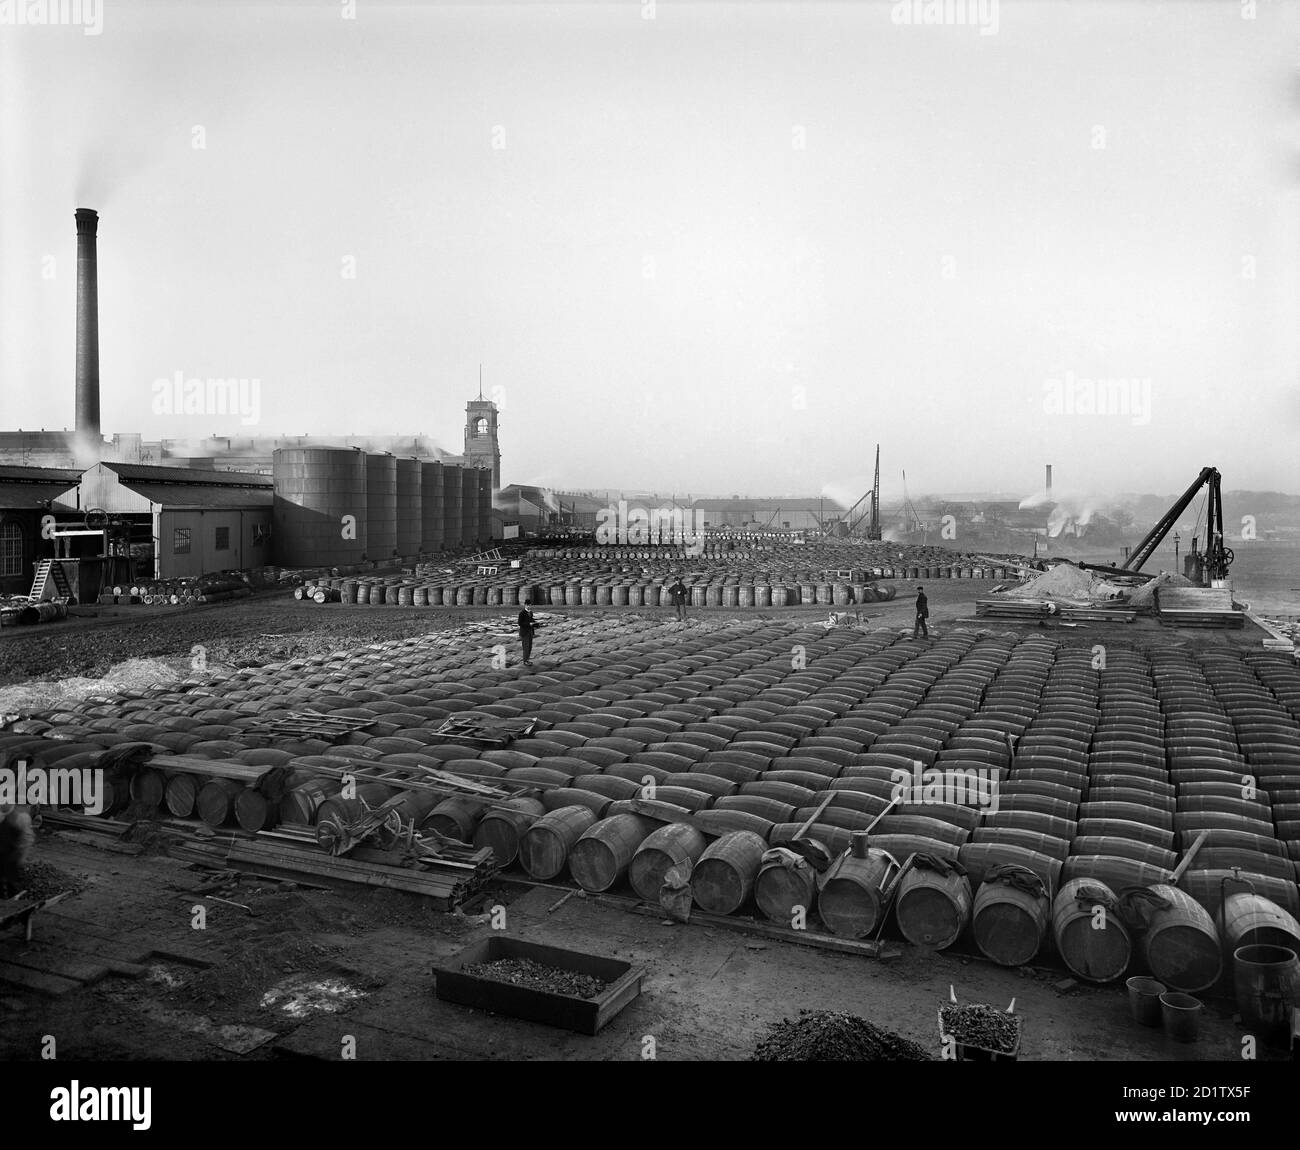 LEVER BROTHERS SUNLIGHT SOAP WORKS, Port Sunlight, Wirral, Merseyside. Photographed by Bedford Lemere & Co. in April 1897. Thousands of barrels of tallow and other soap ingredients stacked in rows, with factory buildings in the background left. This photograph was commissioned by Lever Brothers. Stock Photo